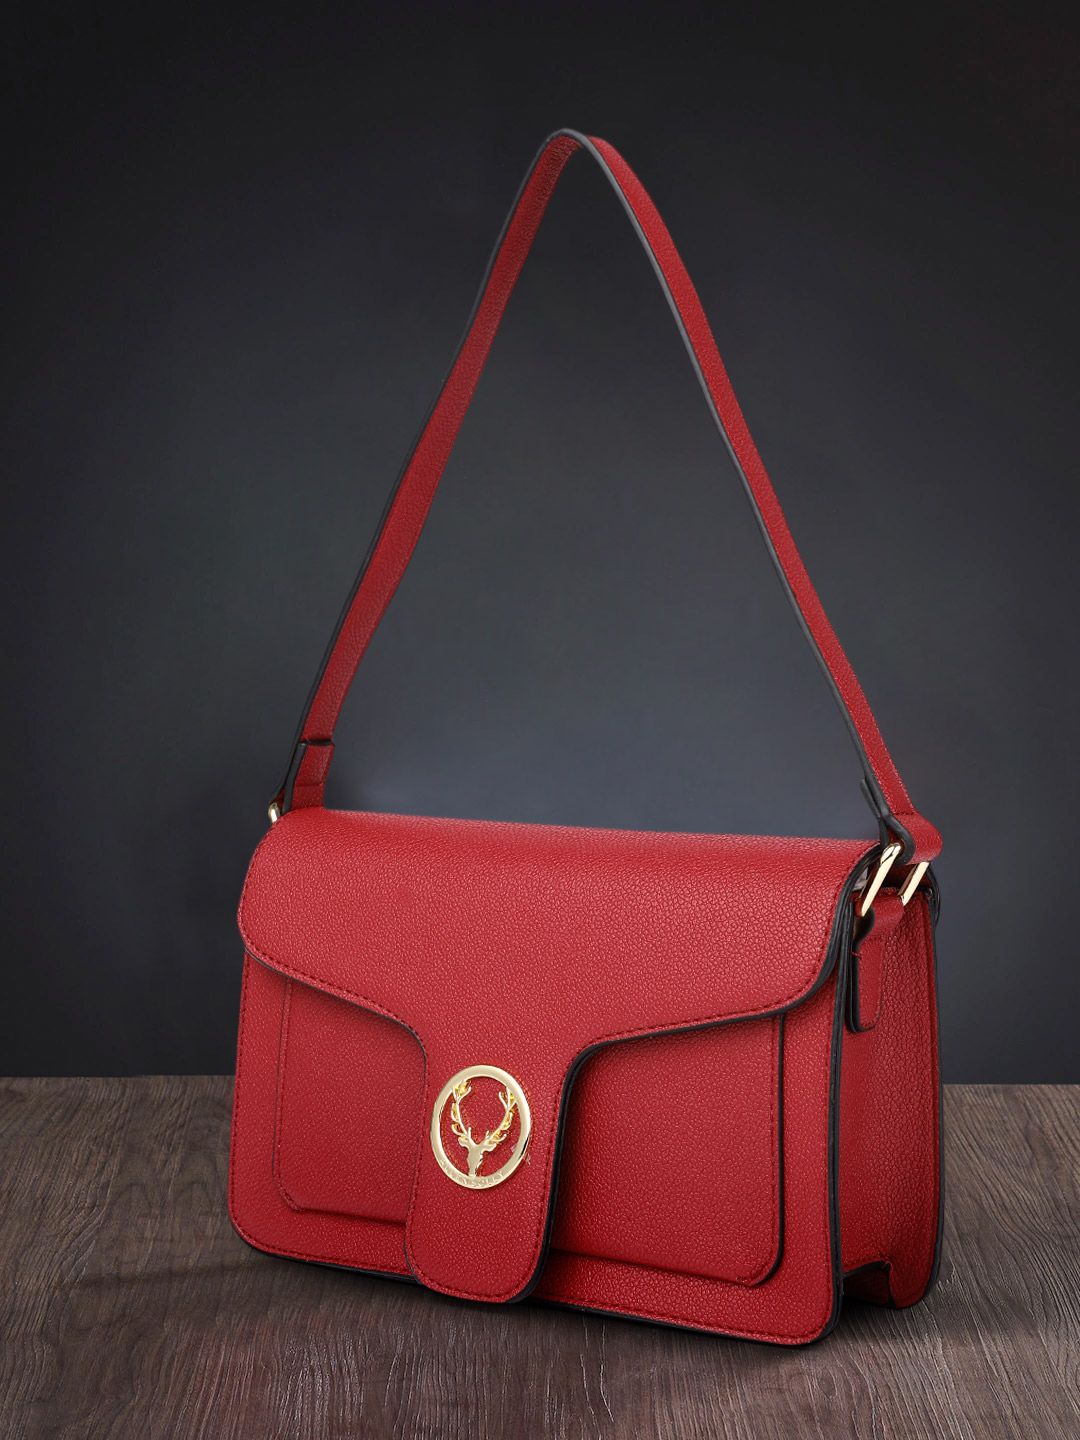 Allen Solly Red Solid Structured Handheld Bag Price in India